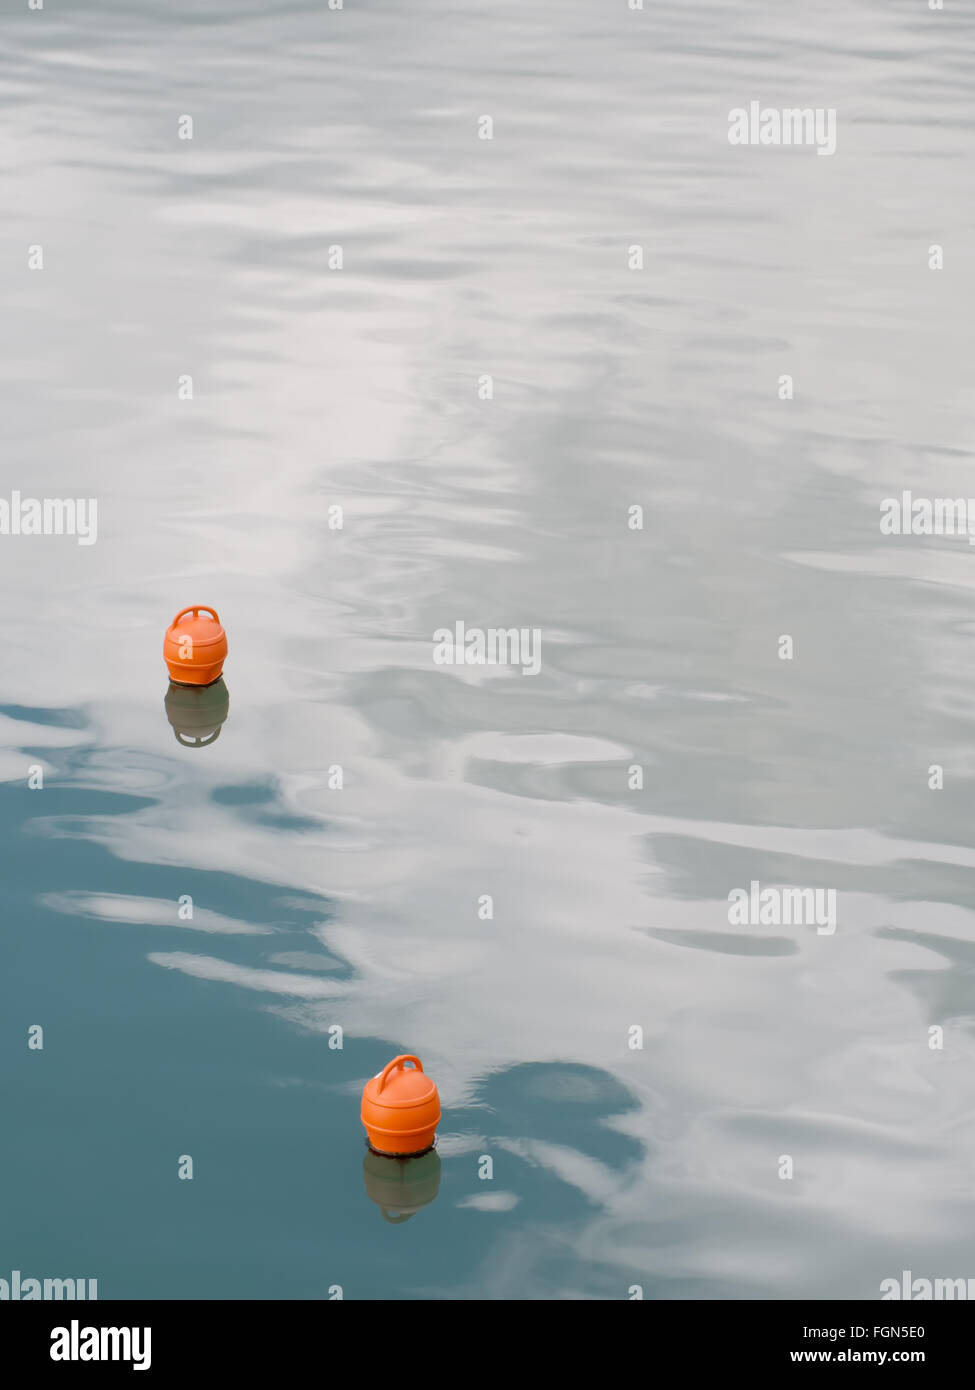 Calm sea scene. Buoys and lapping waves. Vertical composition. Stock Photo